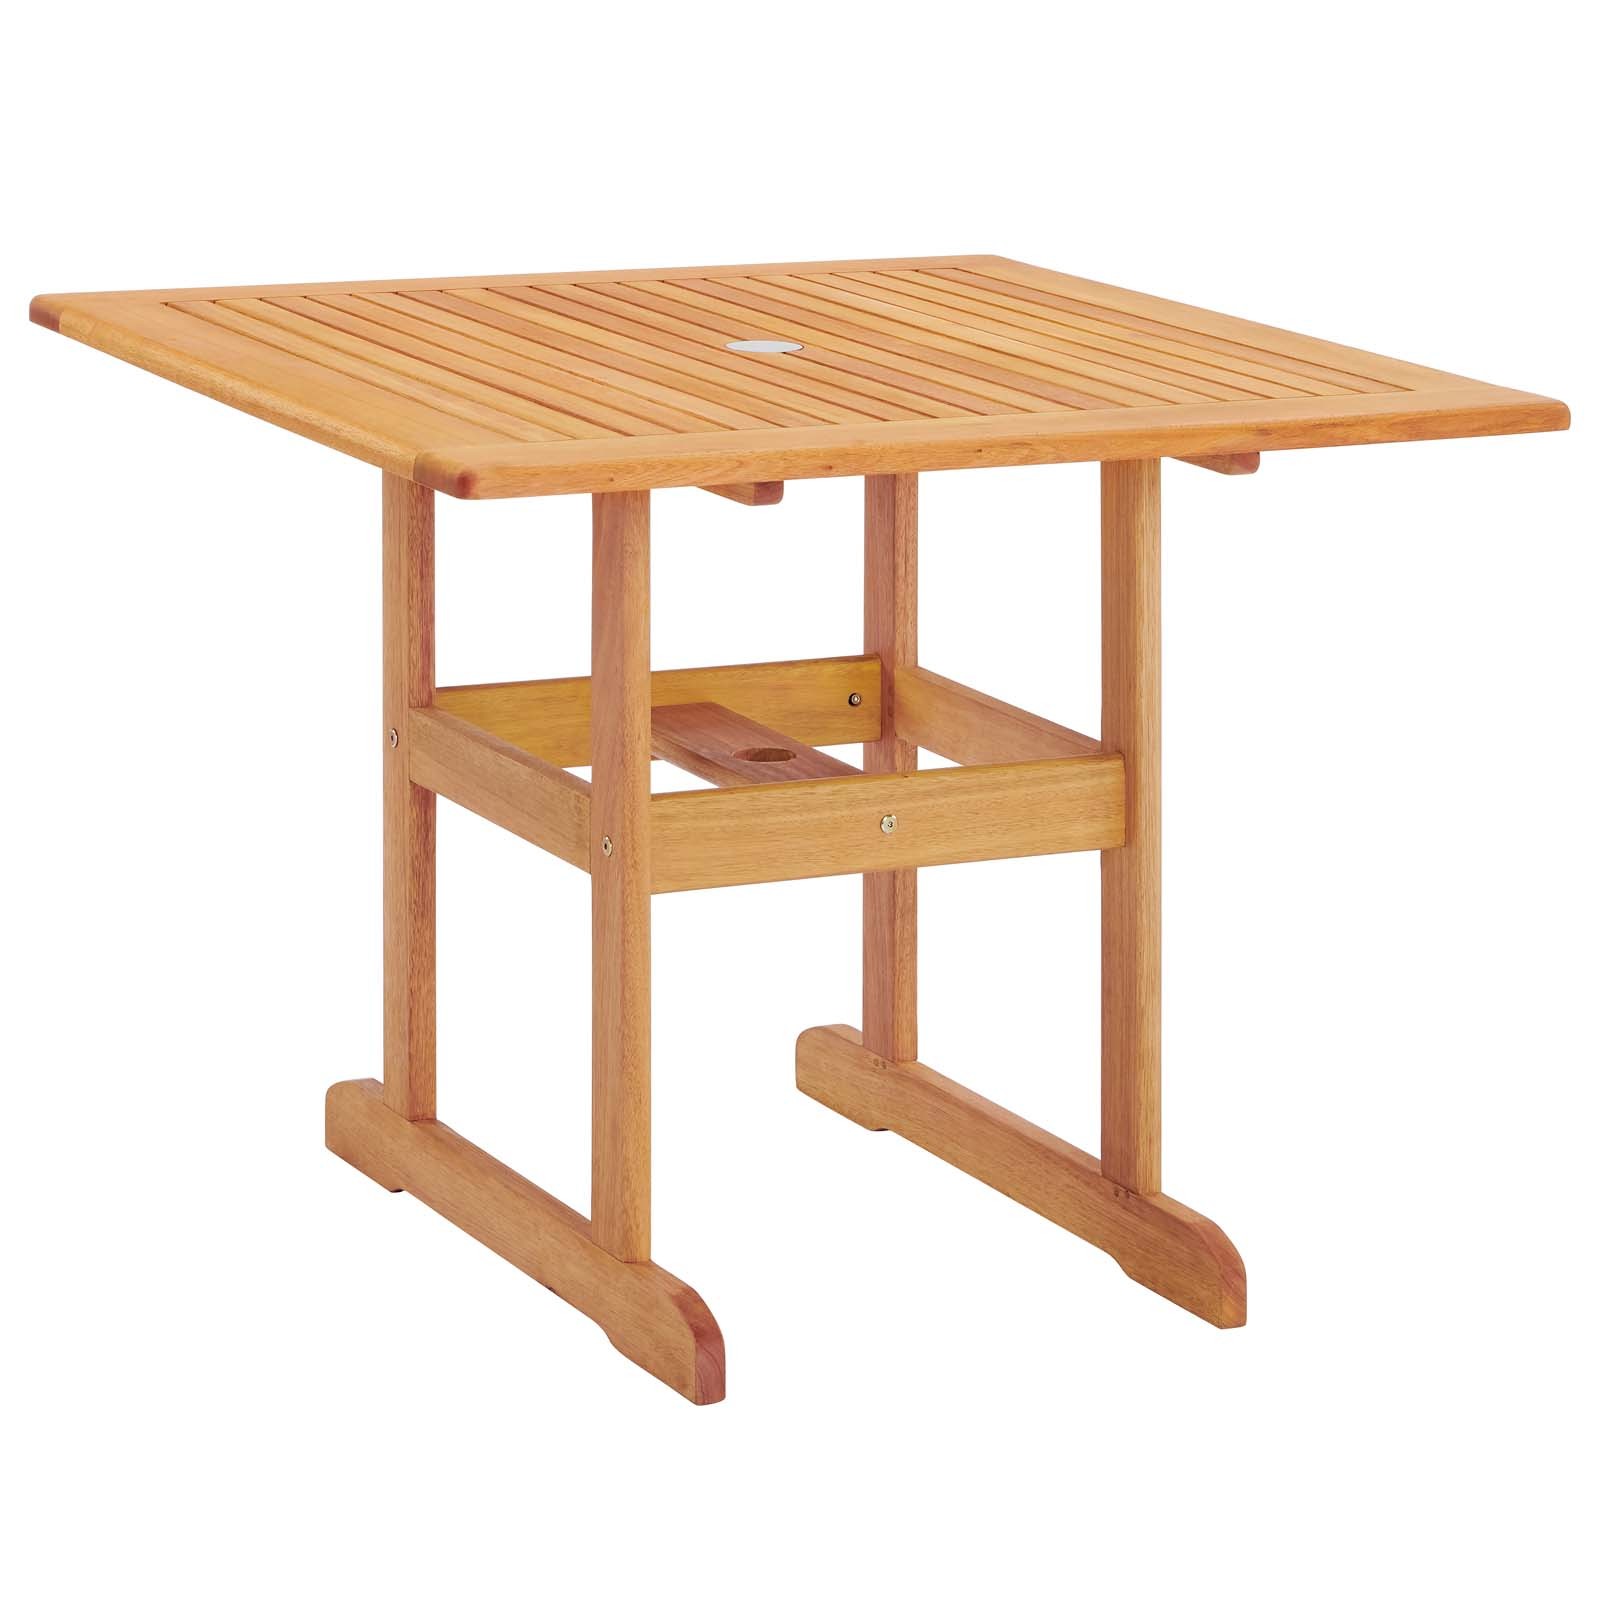 Hatteras 36 Inch Square Outdoor Patio Eucalyptus Wood Dining Table in Natural